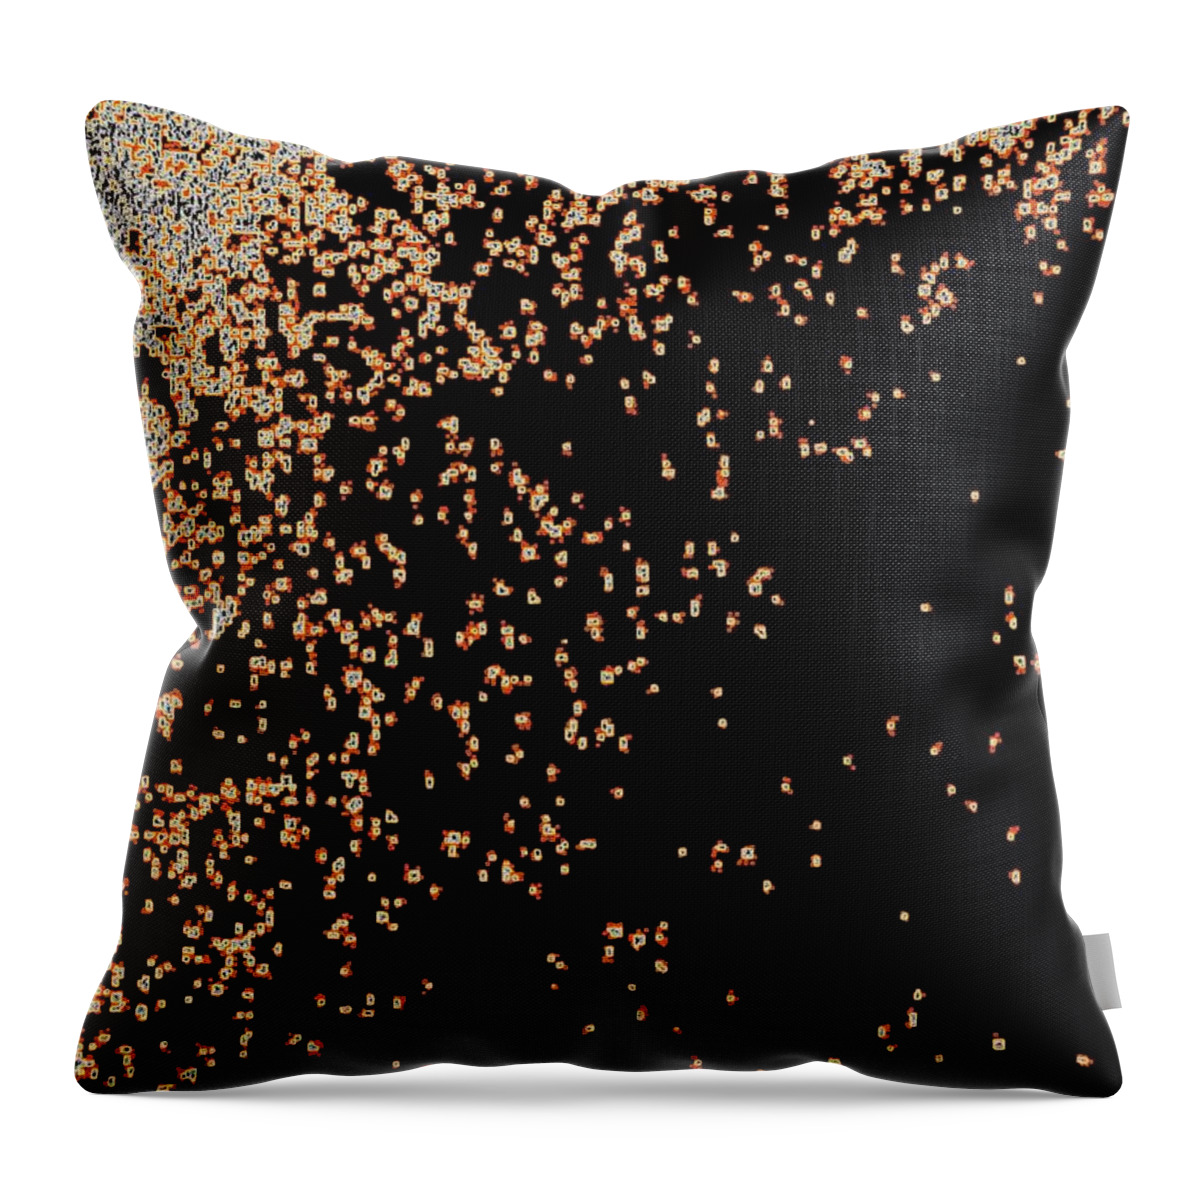 Digital Art Throw Pillow featuring the digital art A Digital Non-Event by VIVA Anderson